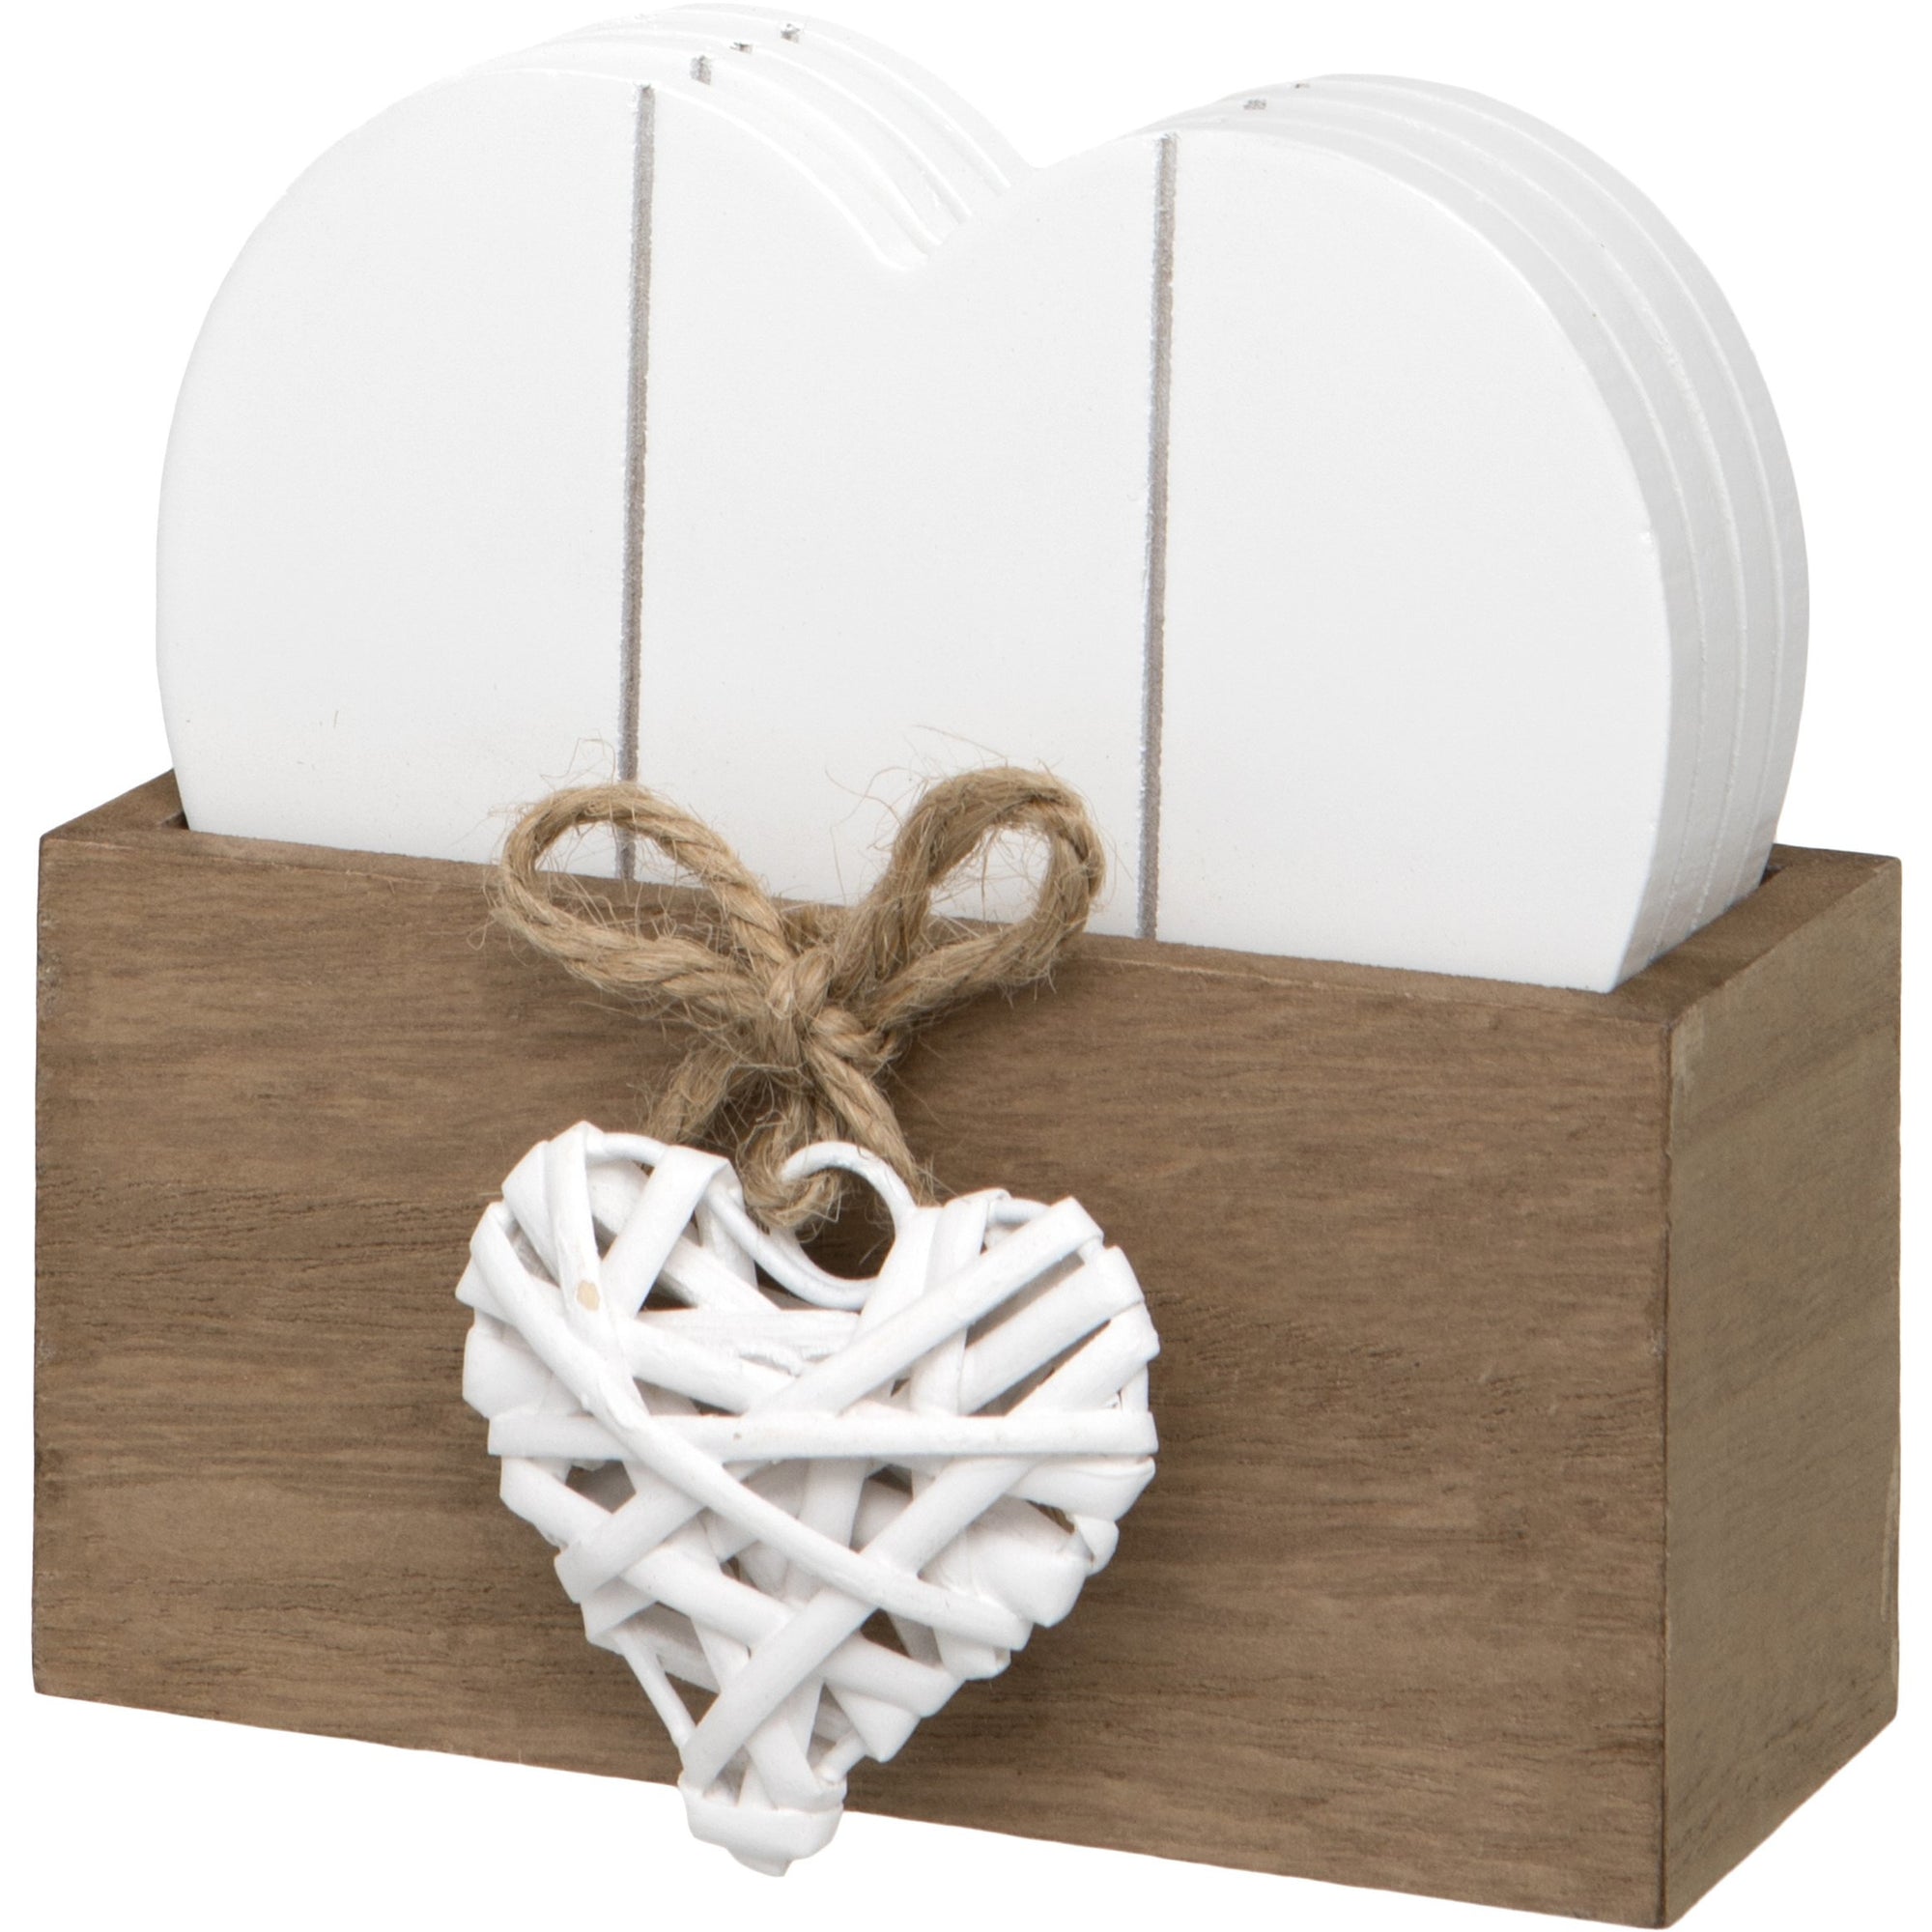 Woven Heart Design Set of 4 Wooden Heart Shaped Coasters with Stand